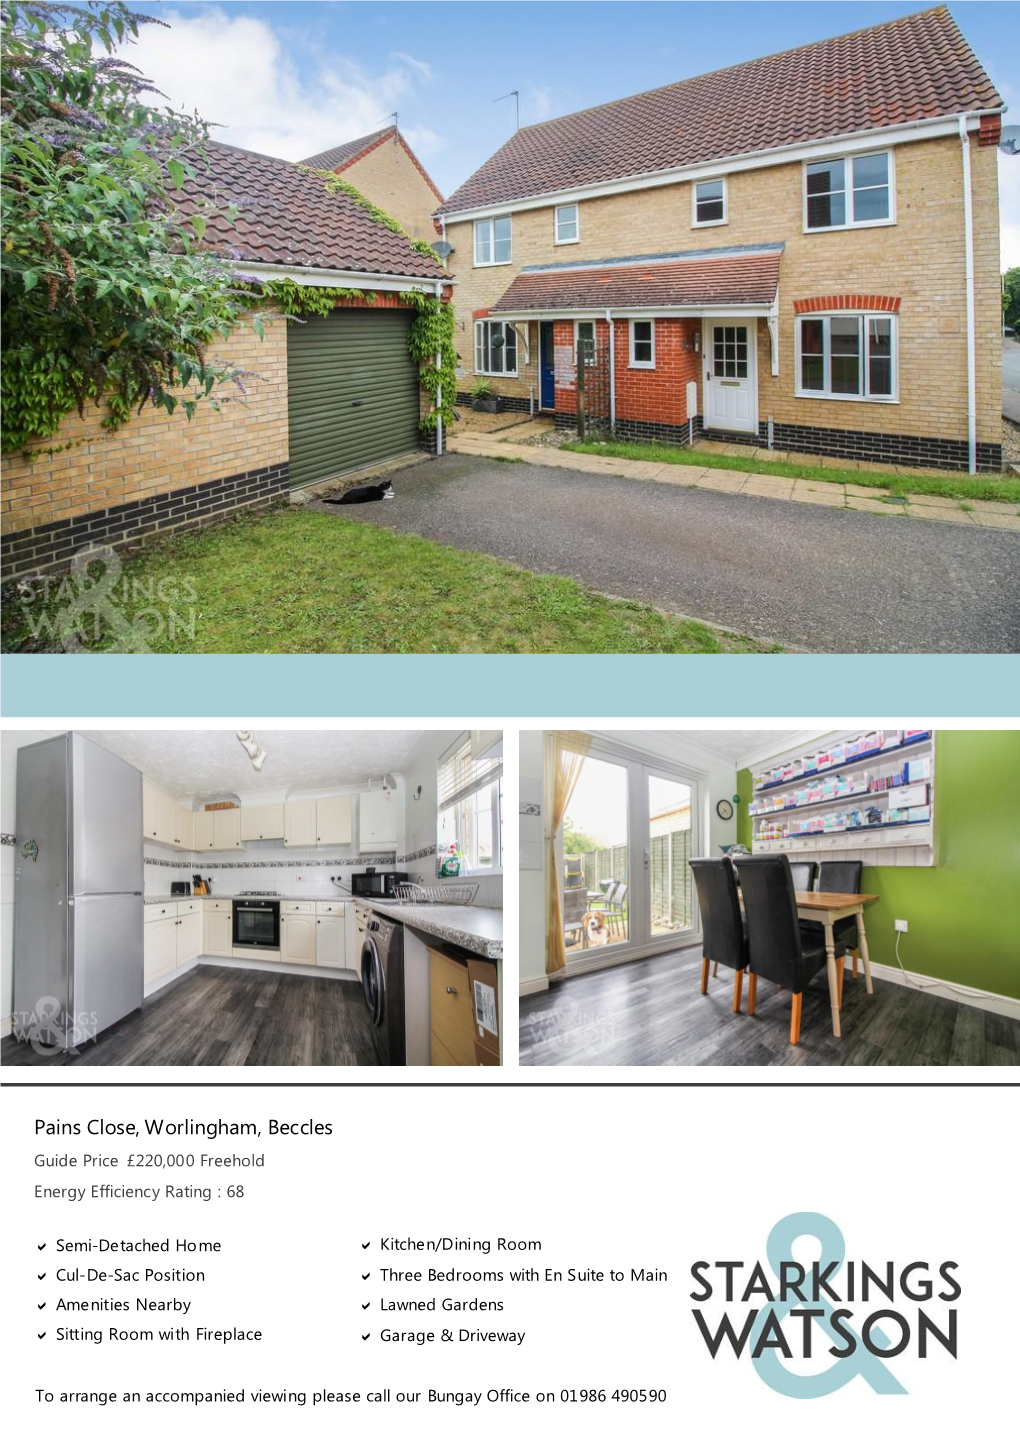 Pains Close, Worlingham, Beccles Guide Price £220,000 Freehold Energy Efficiency Rating : 68